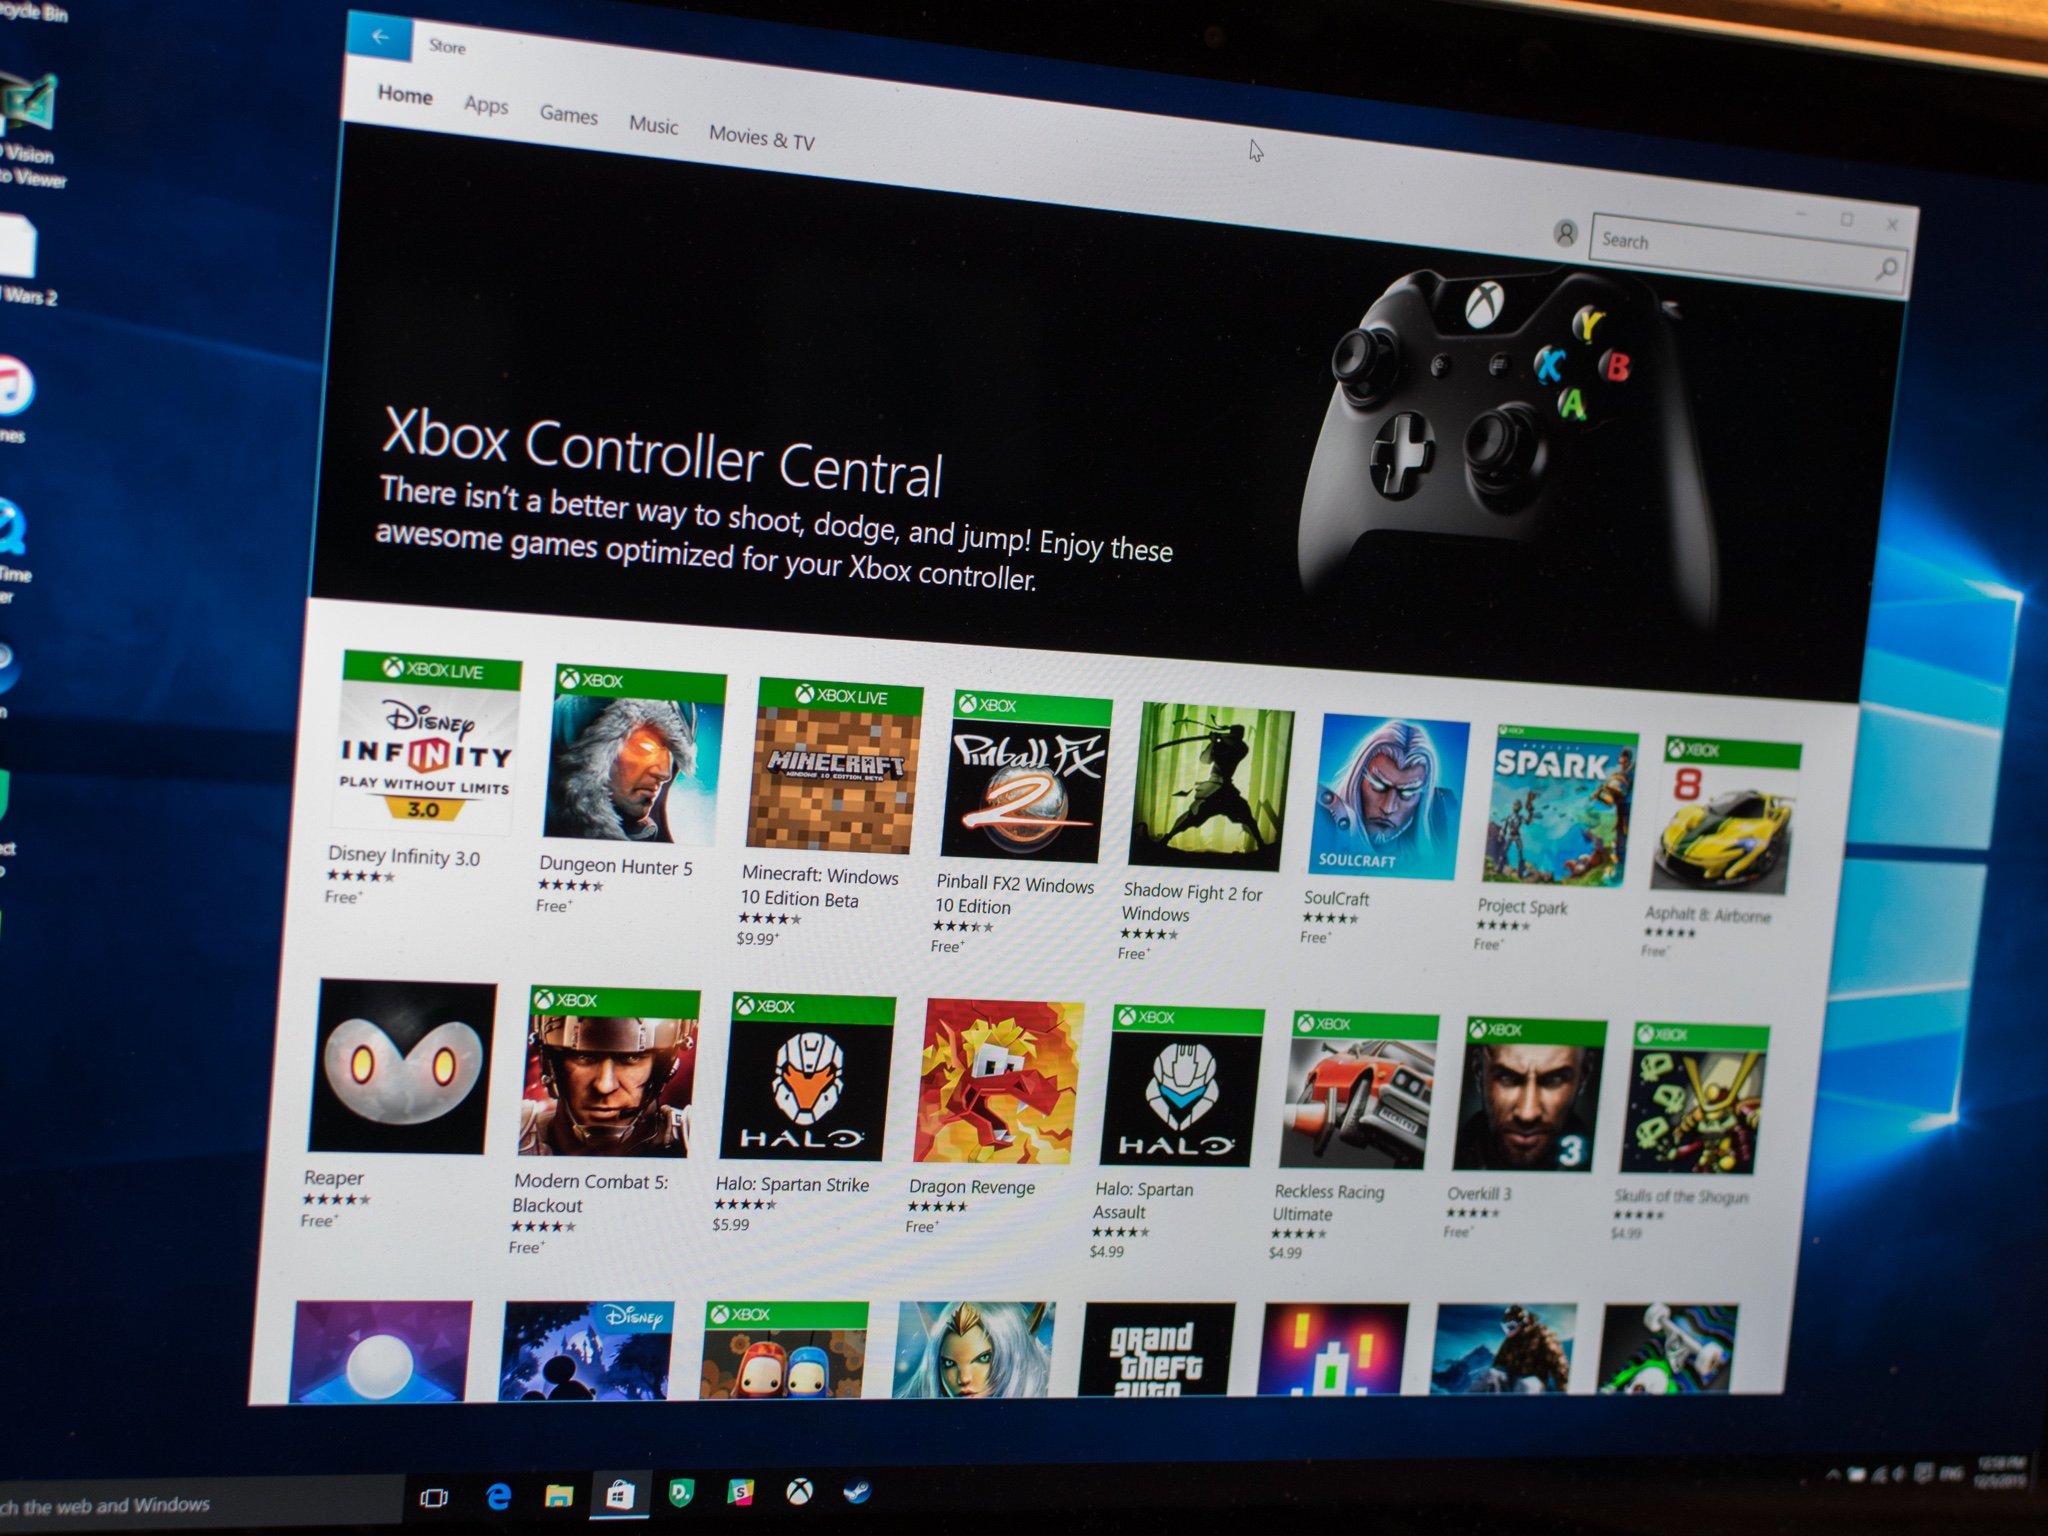 Windows Store highlights the best PC games to play with a controller